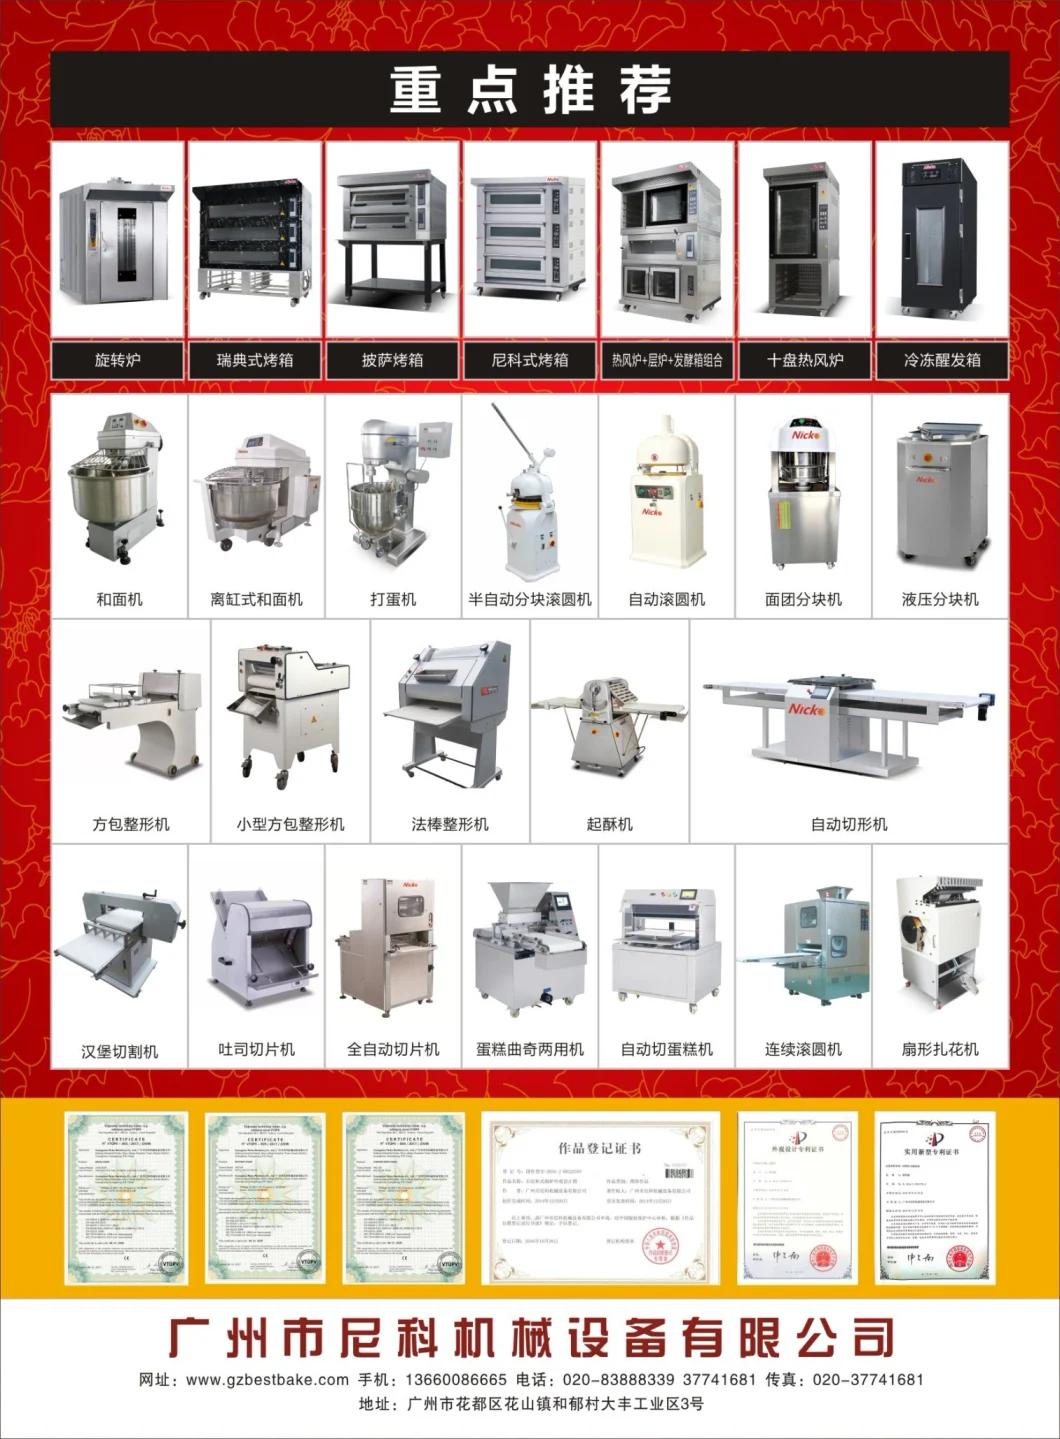 Tunnel Oven for Food Machine Bakery Machines Baking Oven Bakery Equipment